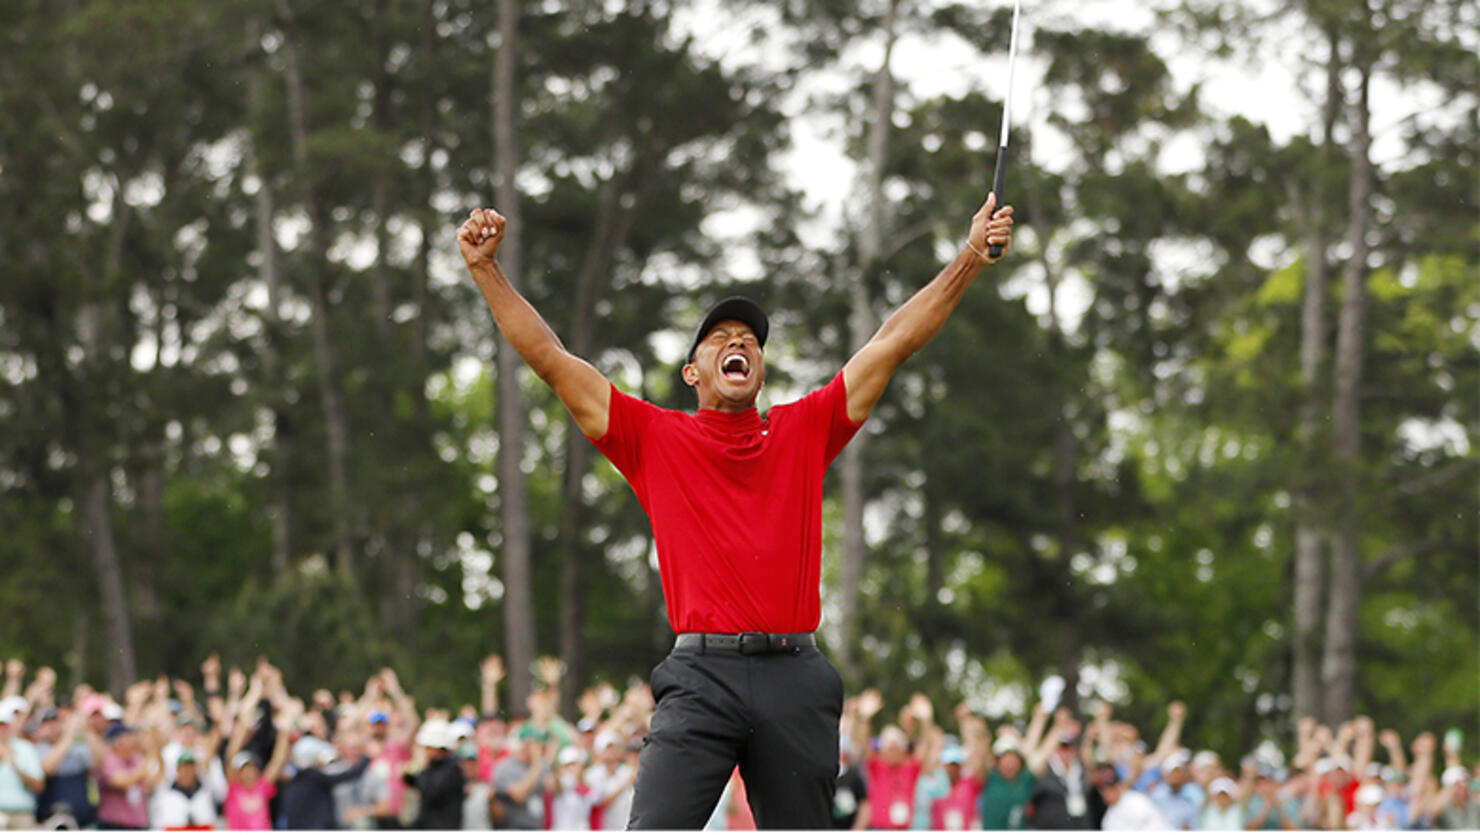 Tiger Woods of the United States celebrates after sinking his putt on the 18th green to win during the final round of the Masters at Augusta National Golf Club on April 14, 2019